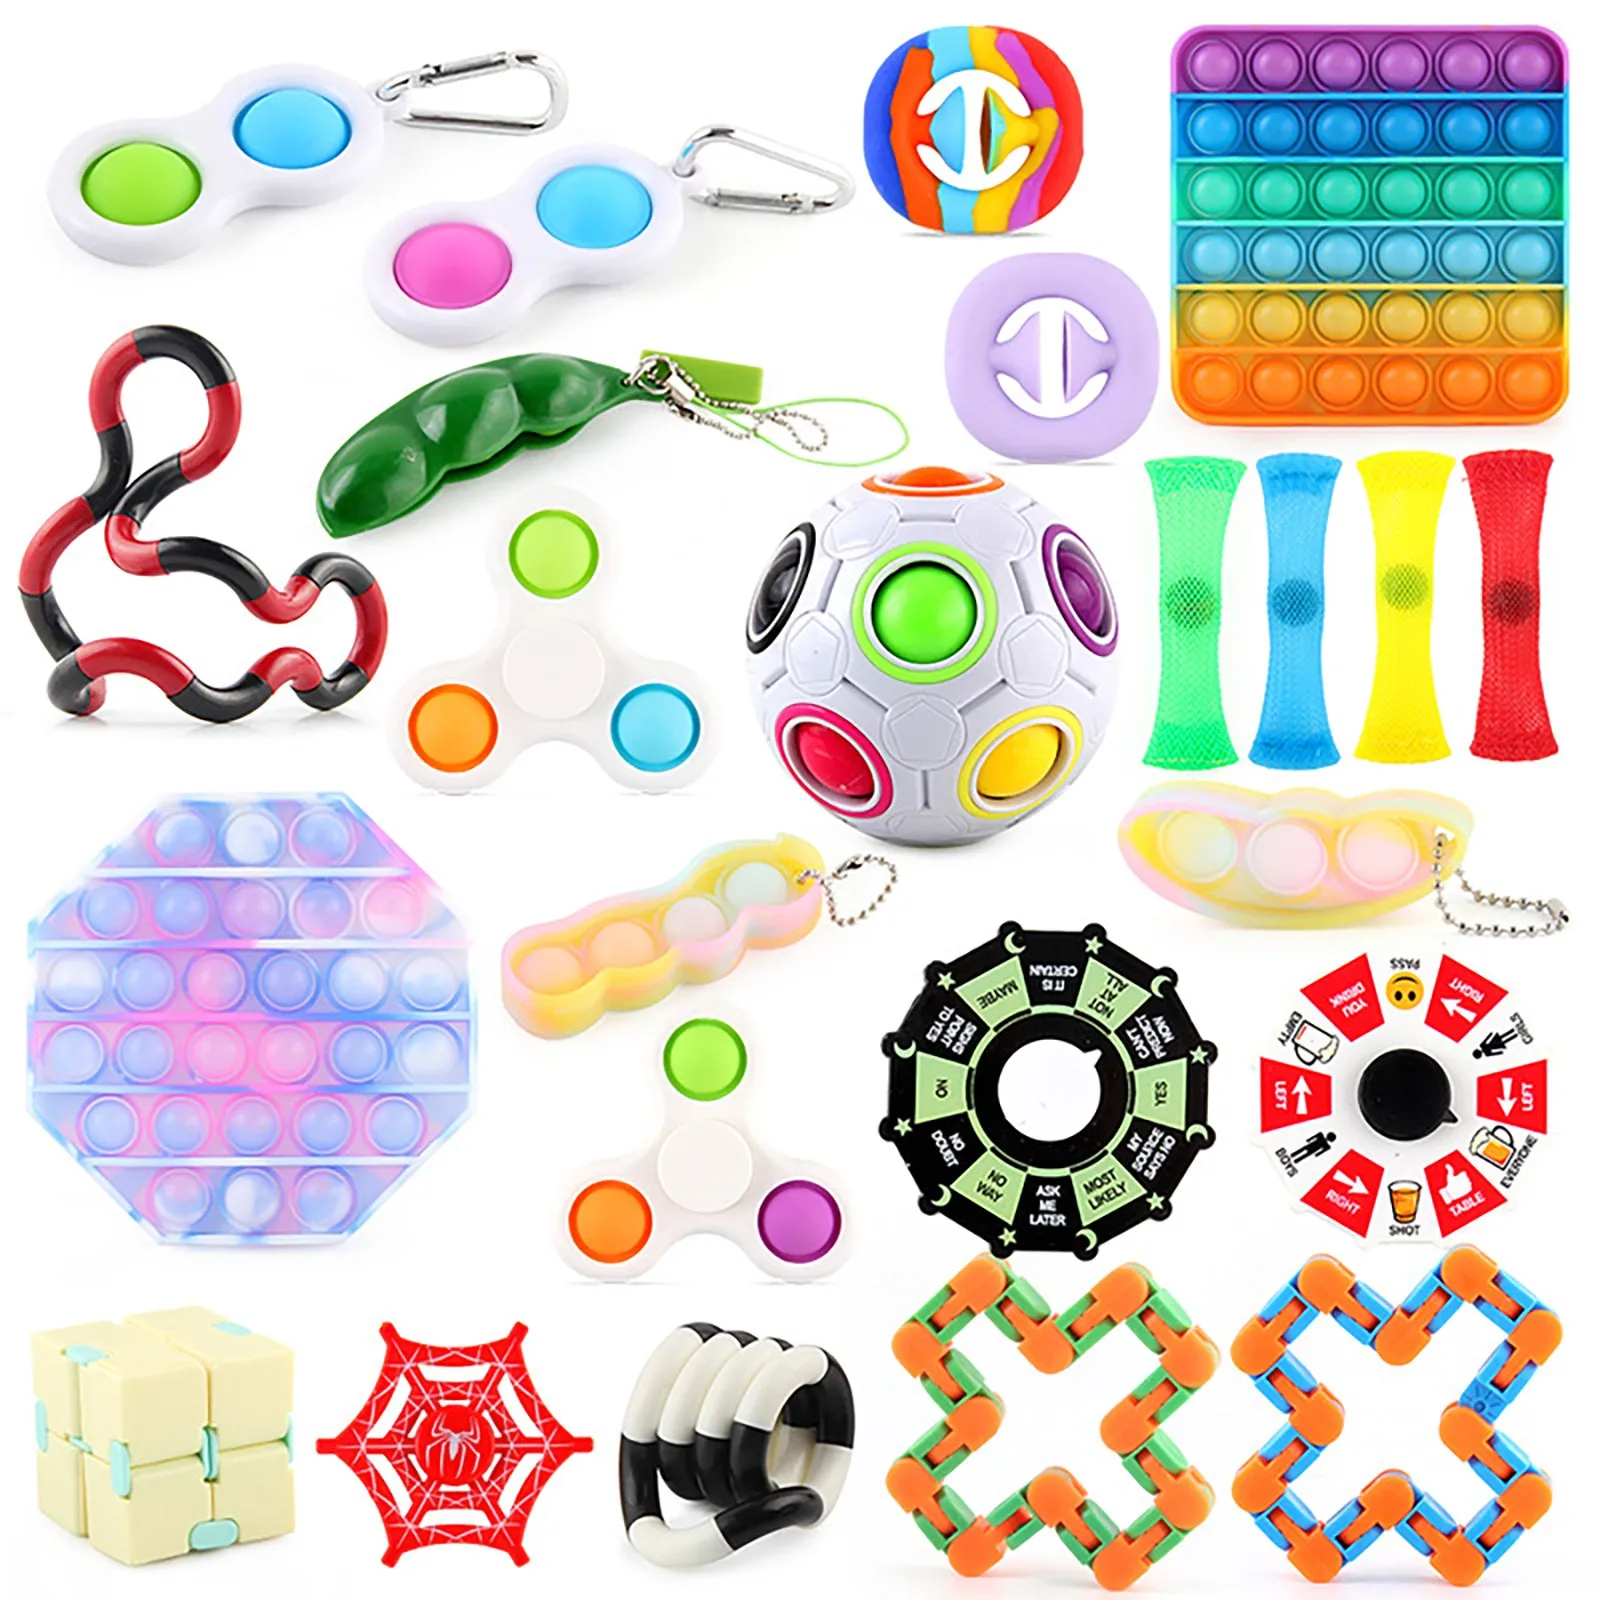 Antistress Fidget Toys Push Bubble Popit Squeeze Sensory Stress Reliever Autism Needs Adult Anxiety Focus Educational Toy Kids img3